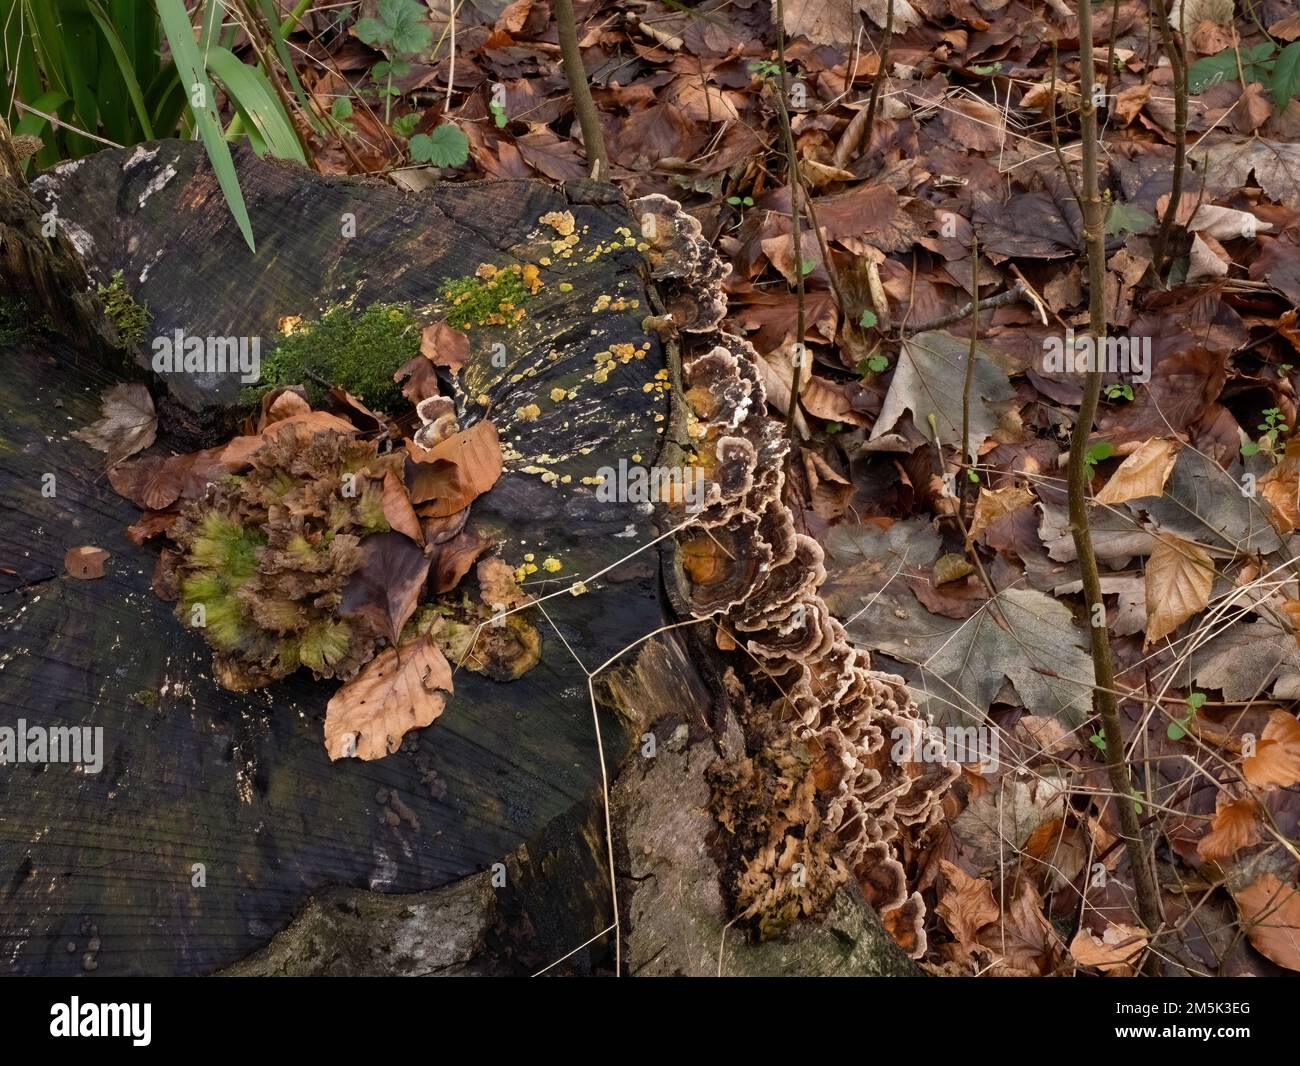 Different types of fungi, moss and mould on old tree stump in Sussex woodland, in England Stock Photo